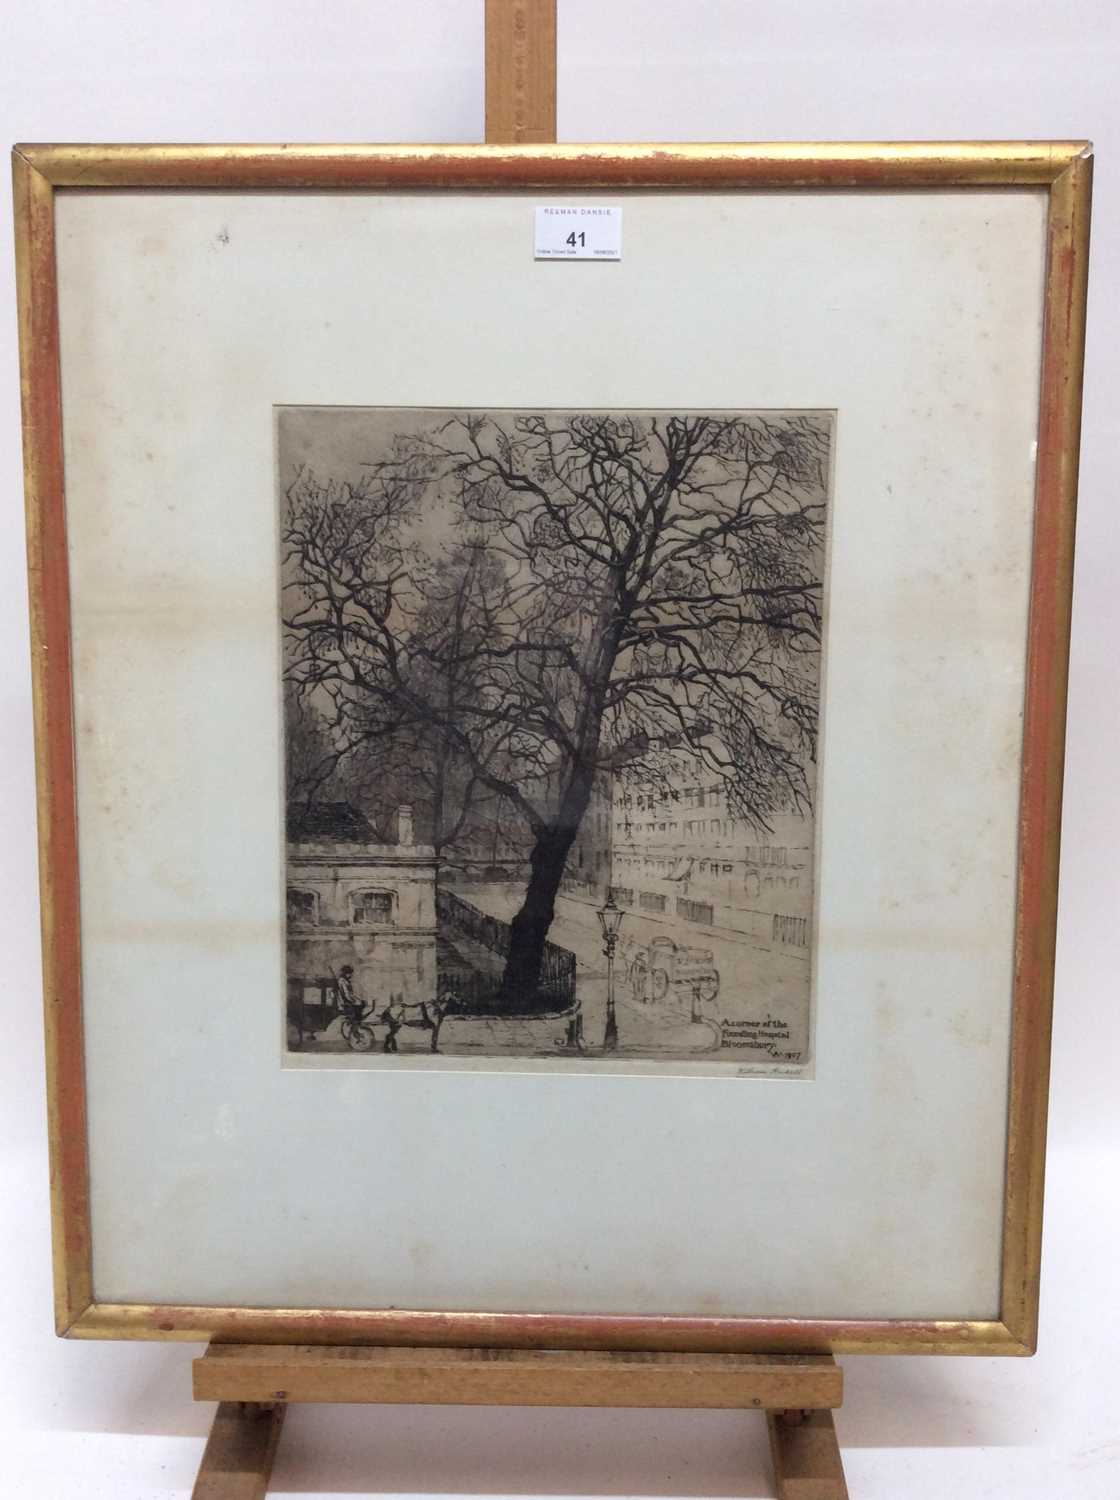 Lot 41 - William Henry Ansell (1872-1959) signed etching - 'A corner of the Foundling Hospital, Bloomsbury, 1907', 31cm x 25cm, in glazed gilt frame